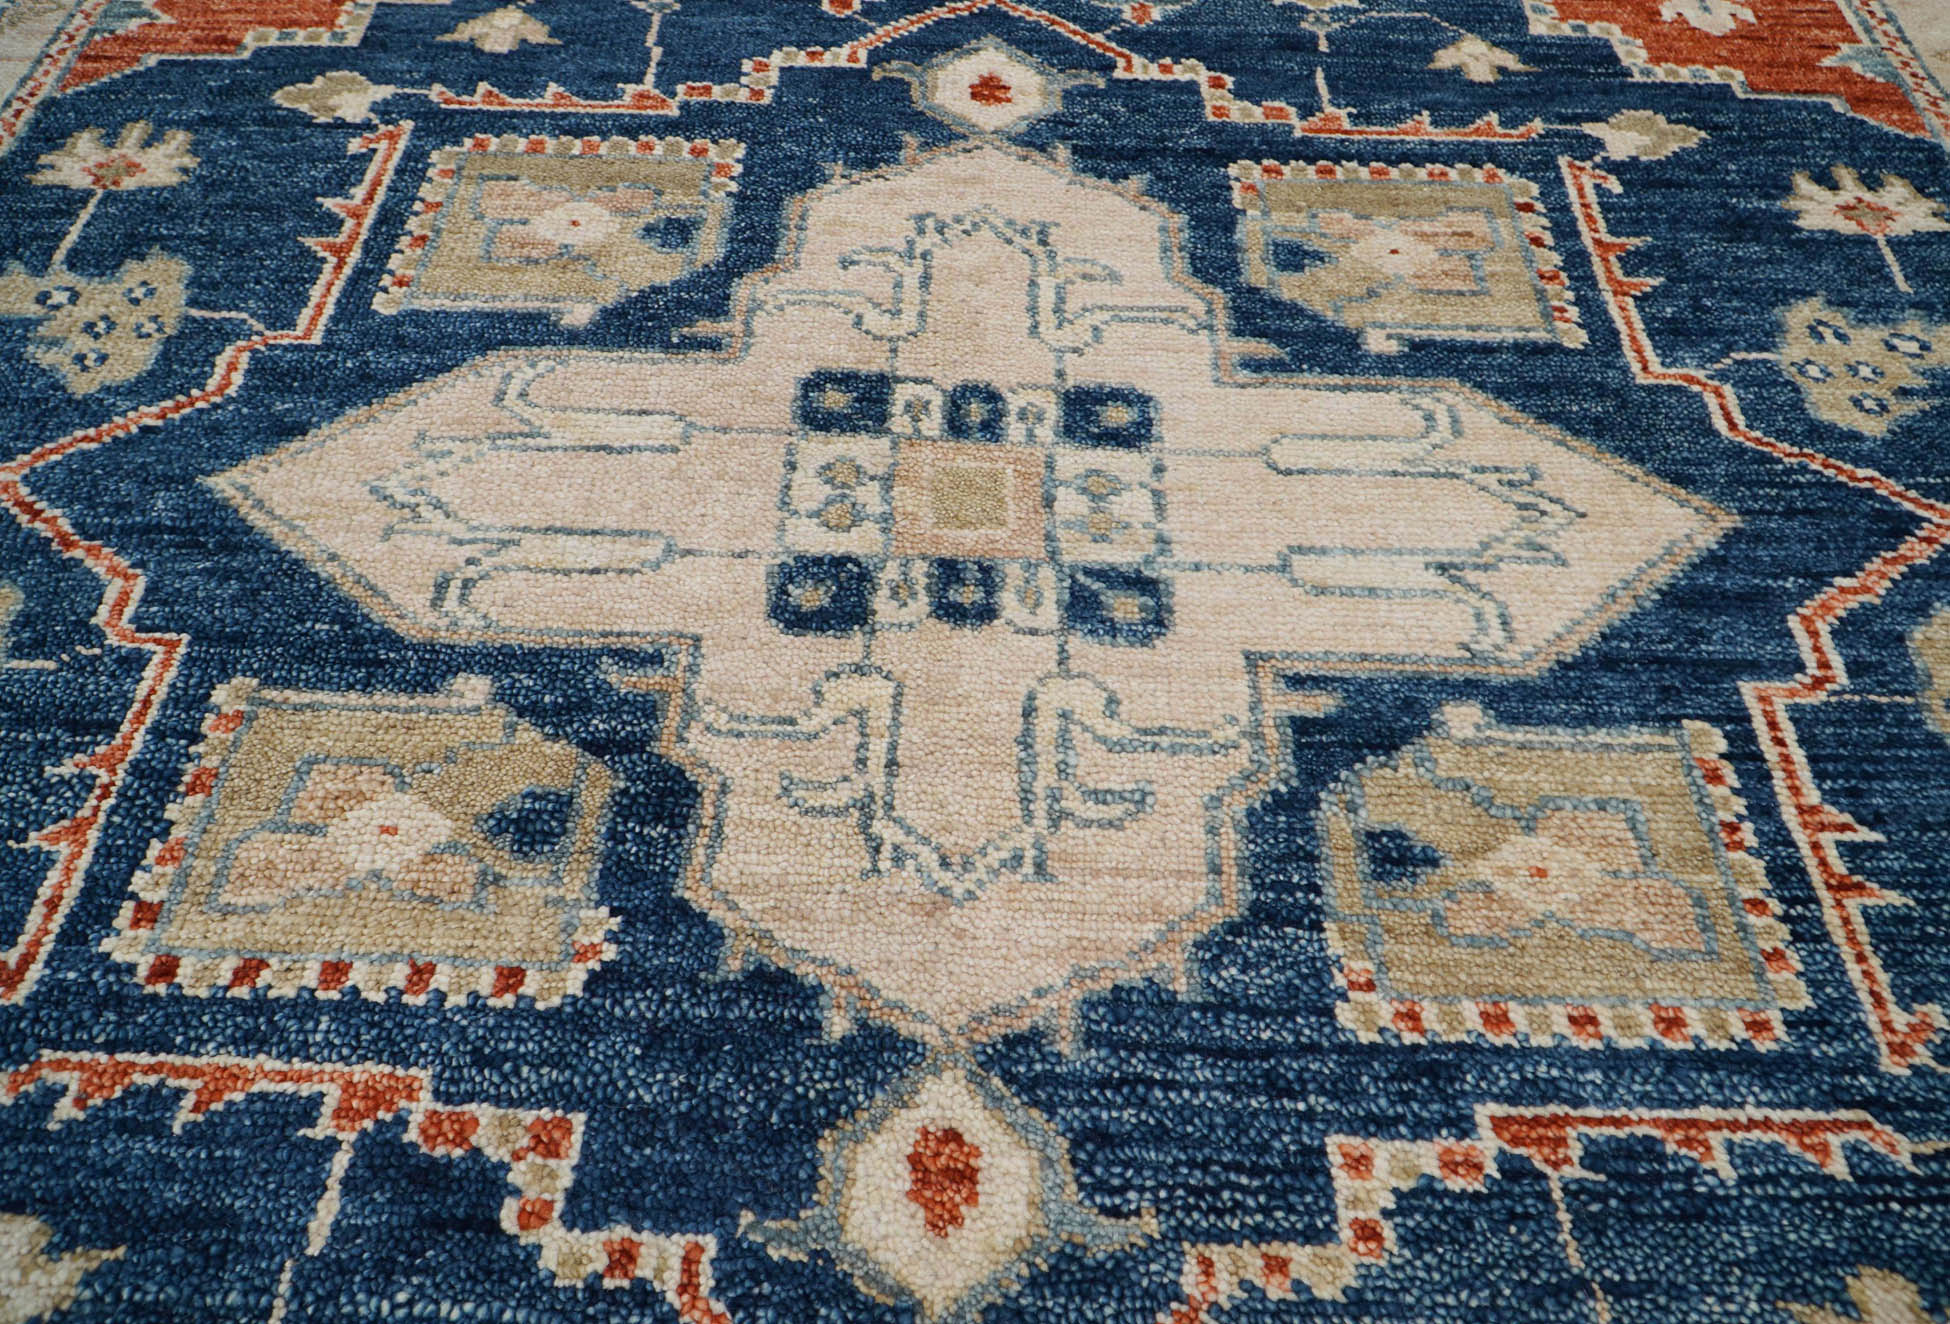 Fagerlund 8x10 Hand Knotted Turkish Oushak  100% Wool Transitional Oriental Area Rug Navy, Burnt Orange Color